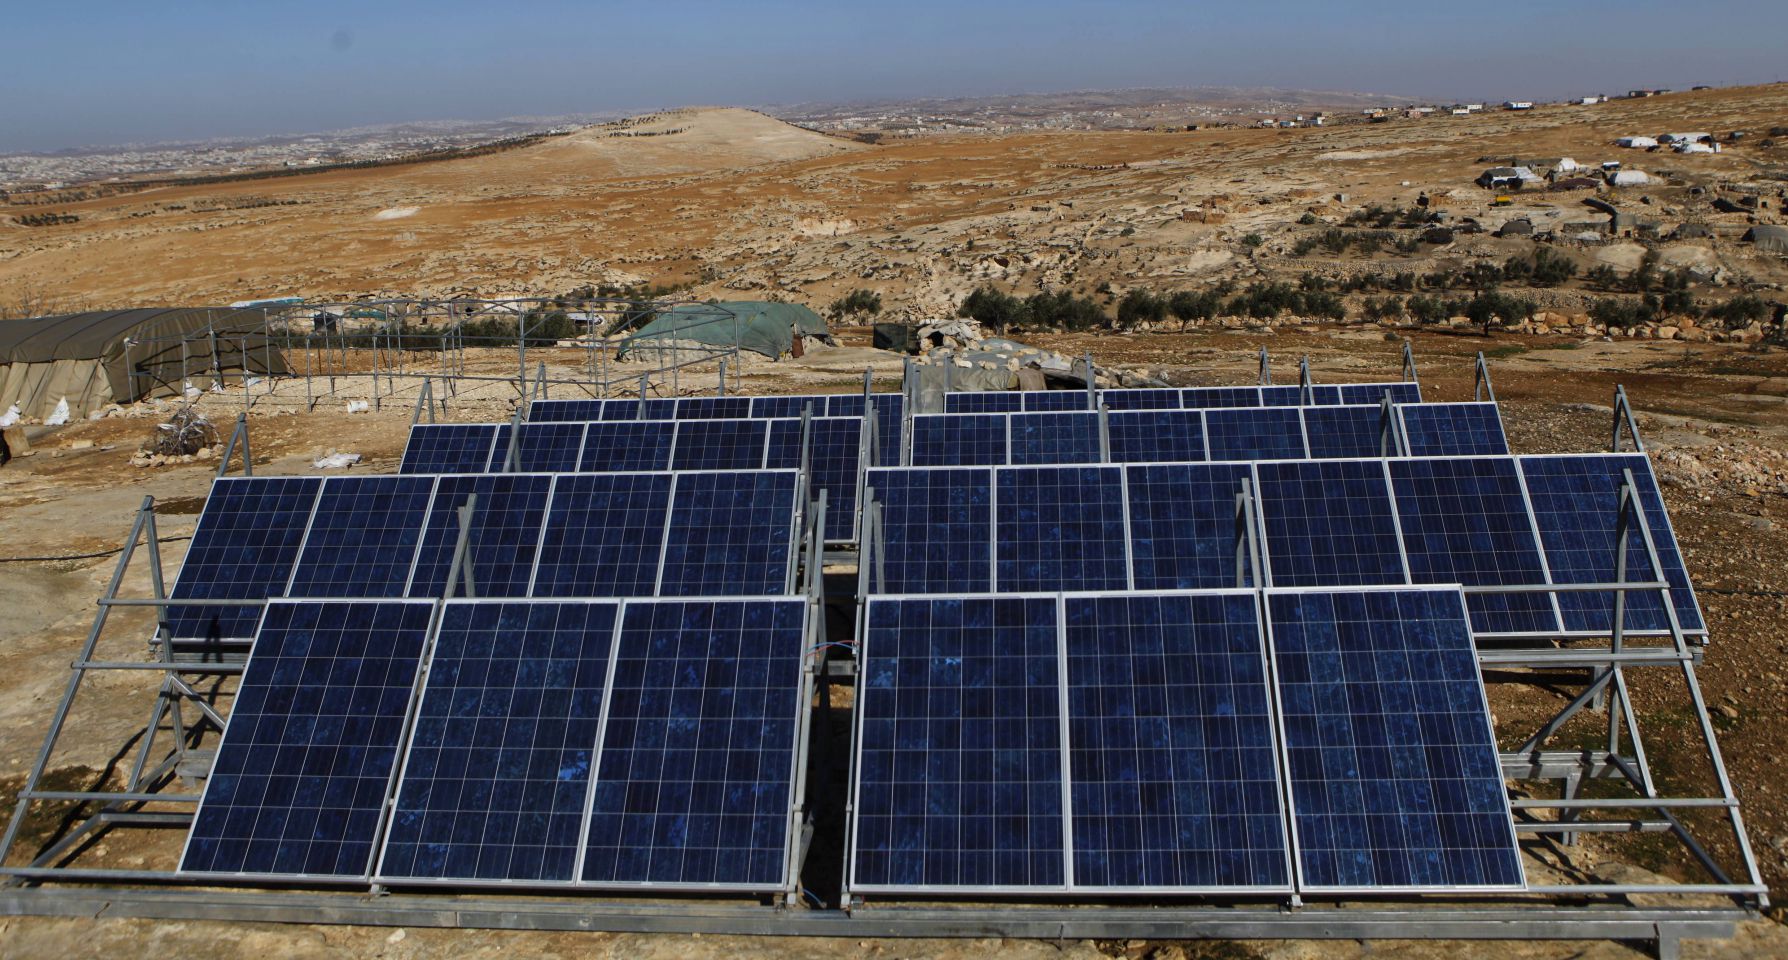 Solar panels in Sha’eb el Buttom. South Mount Hebron is particularly suited to renewable energy, says Comet-ME cofounder Elad Orian. It’s on the edge of a desert, so very sunny, and 800 metres above sea level, so extremely windy. In the winter there are powerful storms, with wind speeds exceeding 150 kilometres an hour
